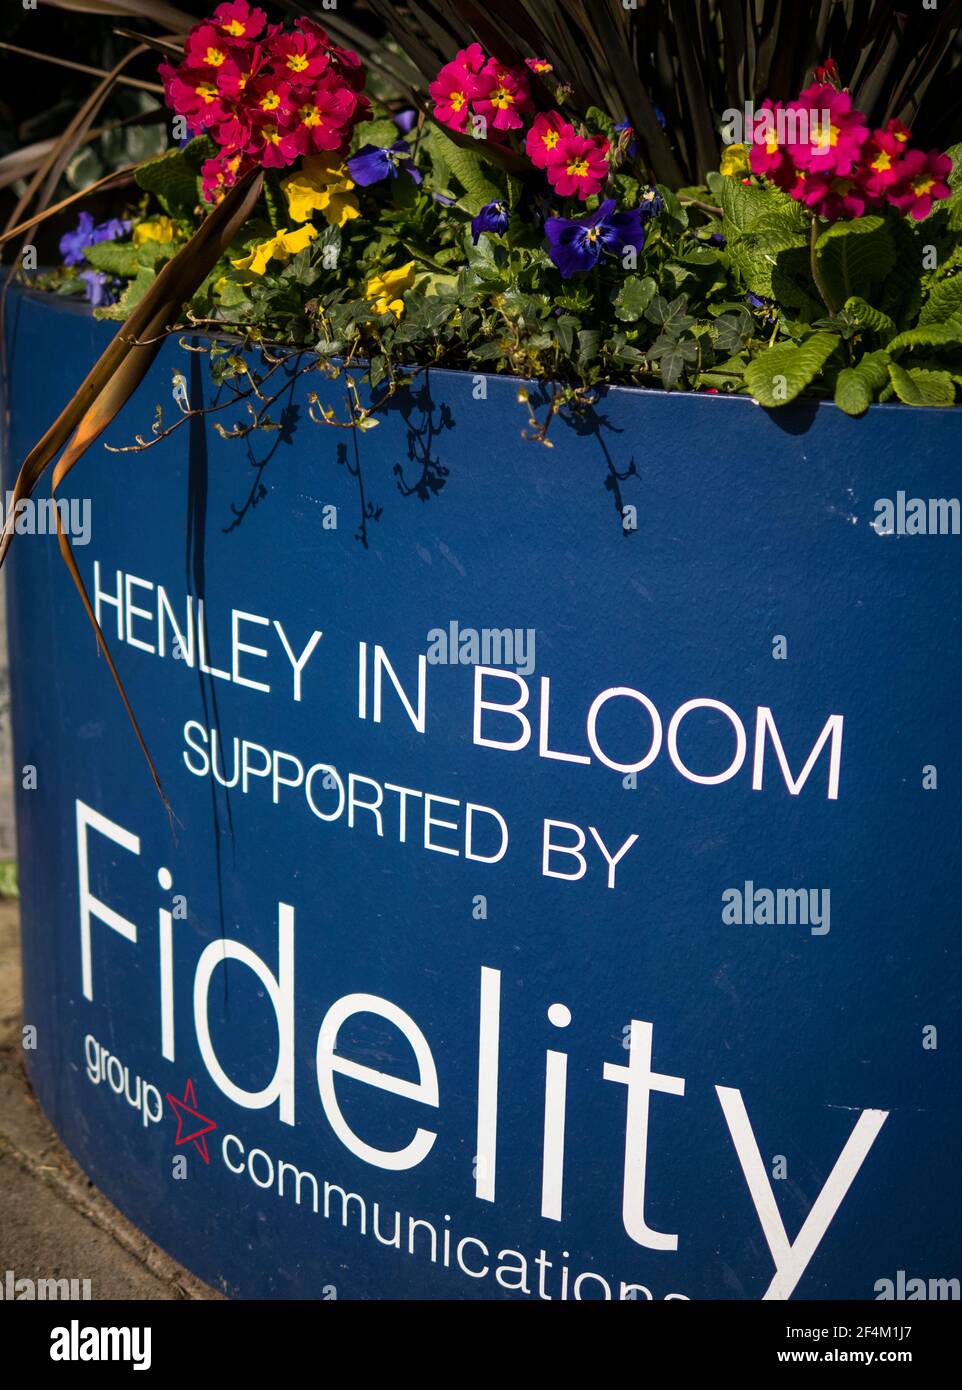 Henley in Bloom, Flowers, Henley-On-Thames, Oxfordshire, England, UK, GB. Stock Photo